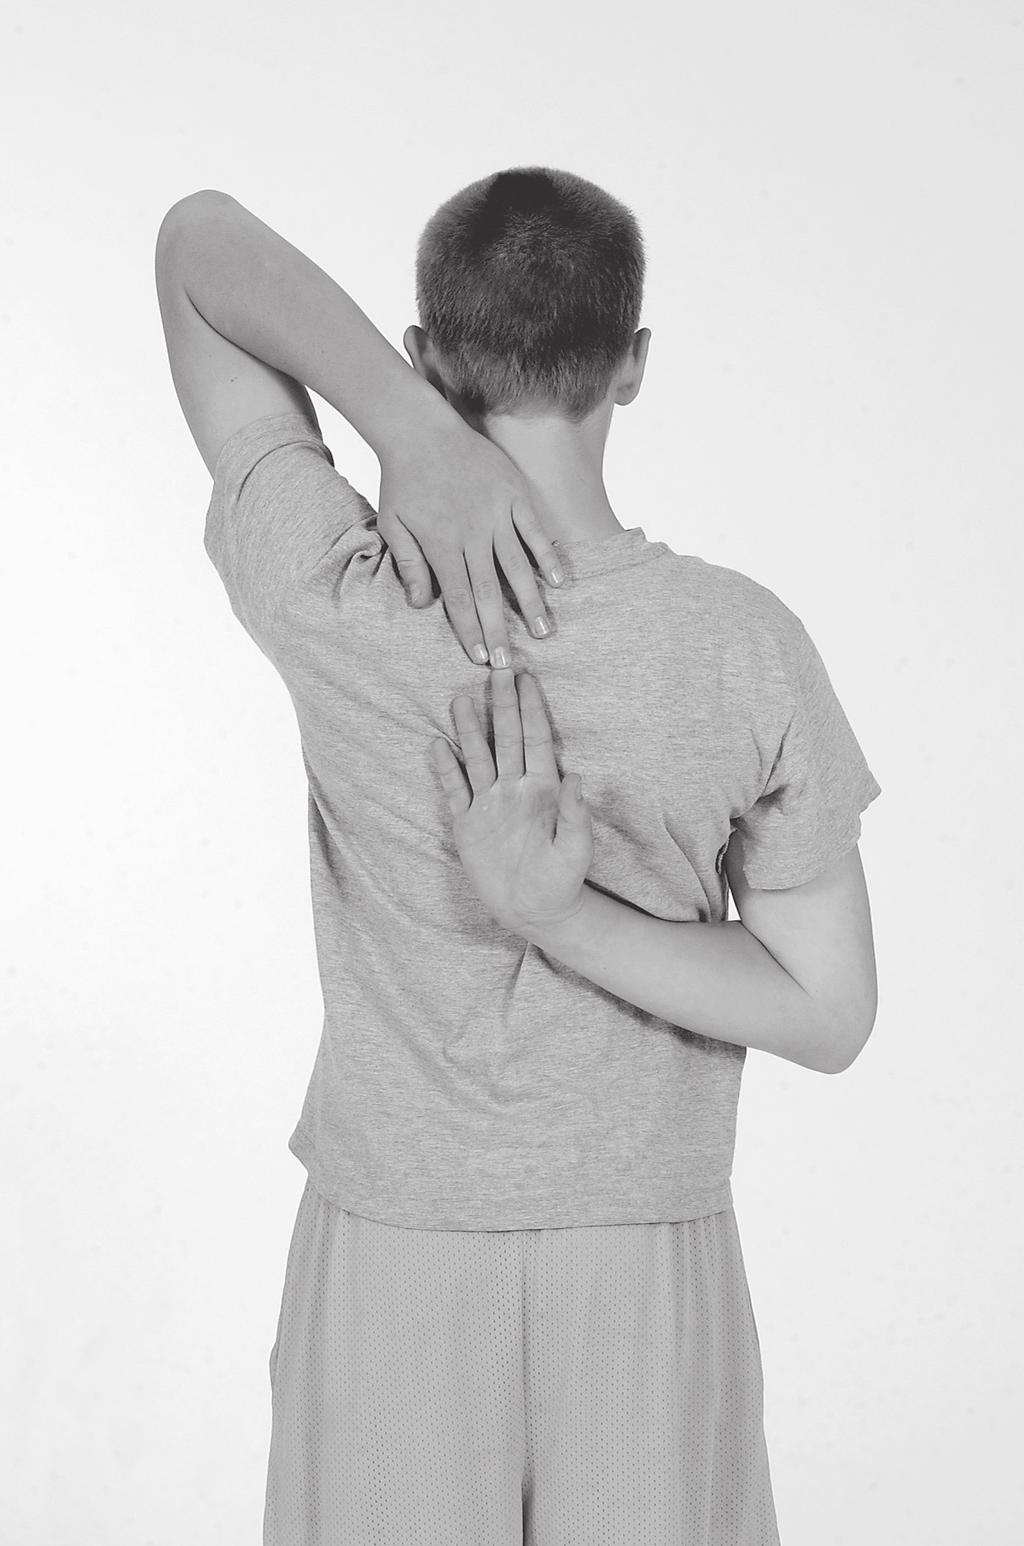 Tester may place one hand above the student s knee to help keep the knee straight. Hands should reach forward evenly. The trial should be repeated if the hands reach unevenly or the knee bends.